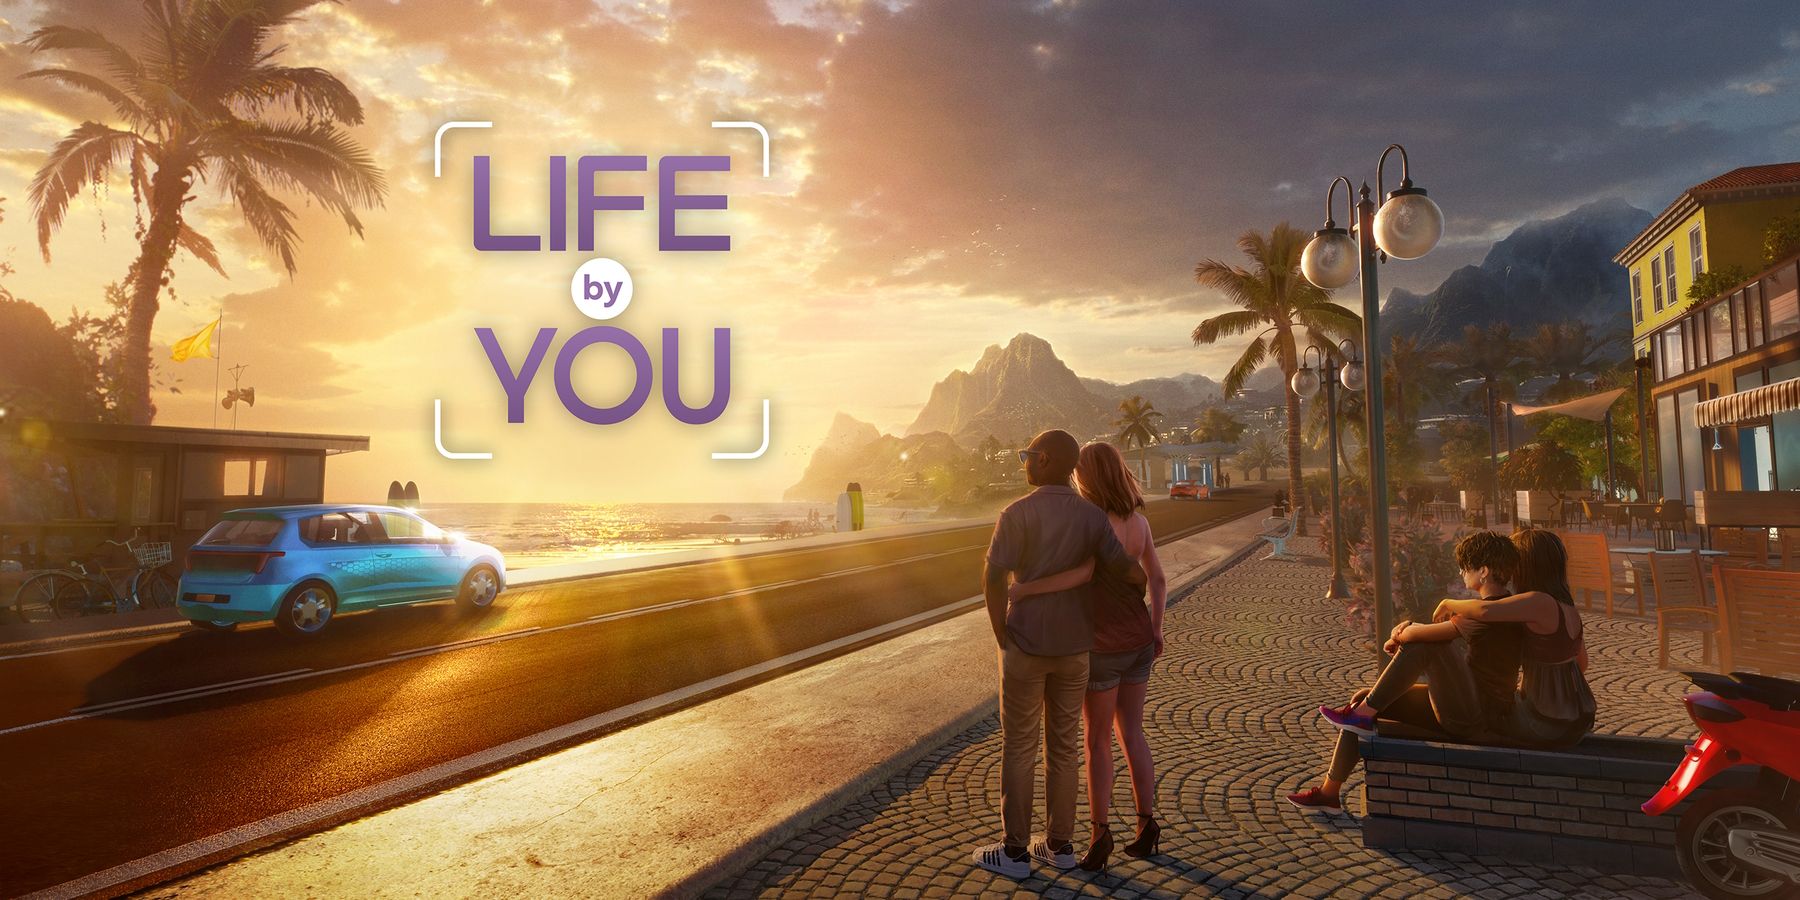 Promo art for Life by You from Paradox Interactive